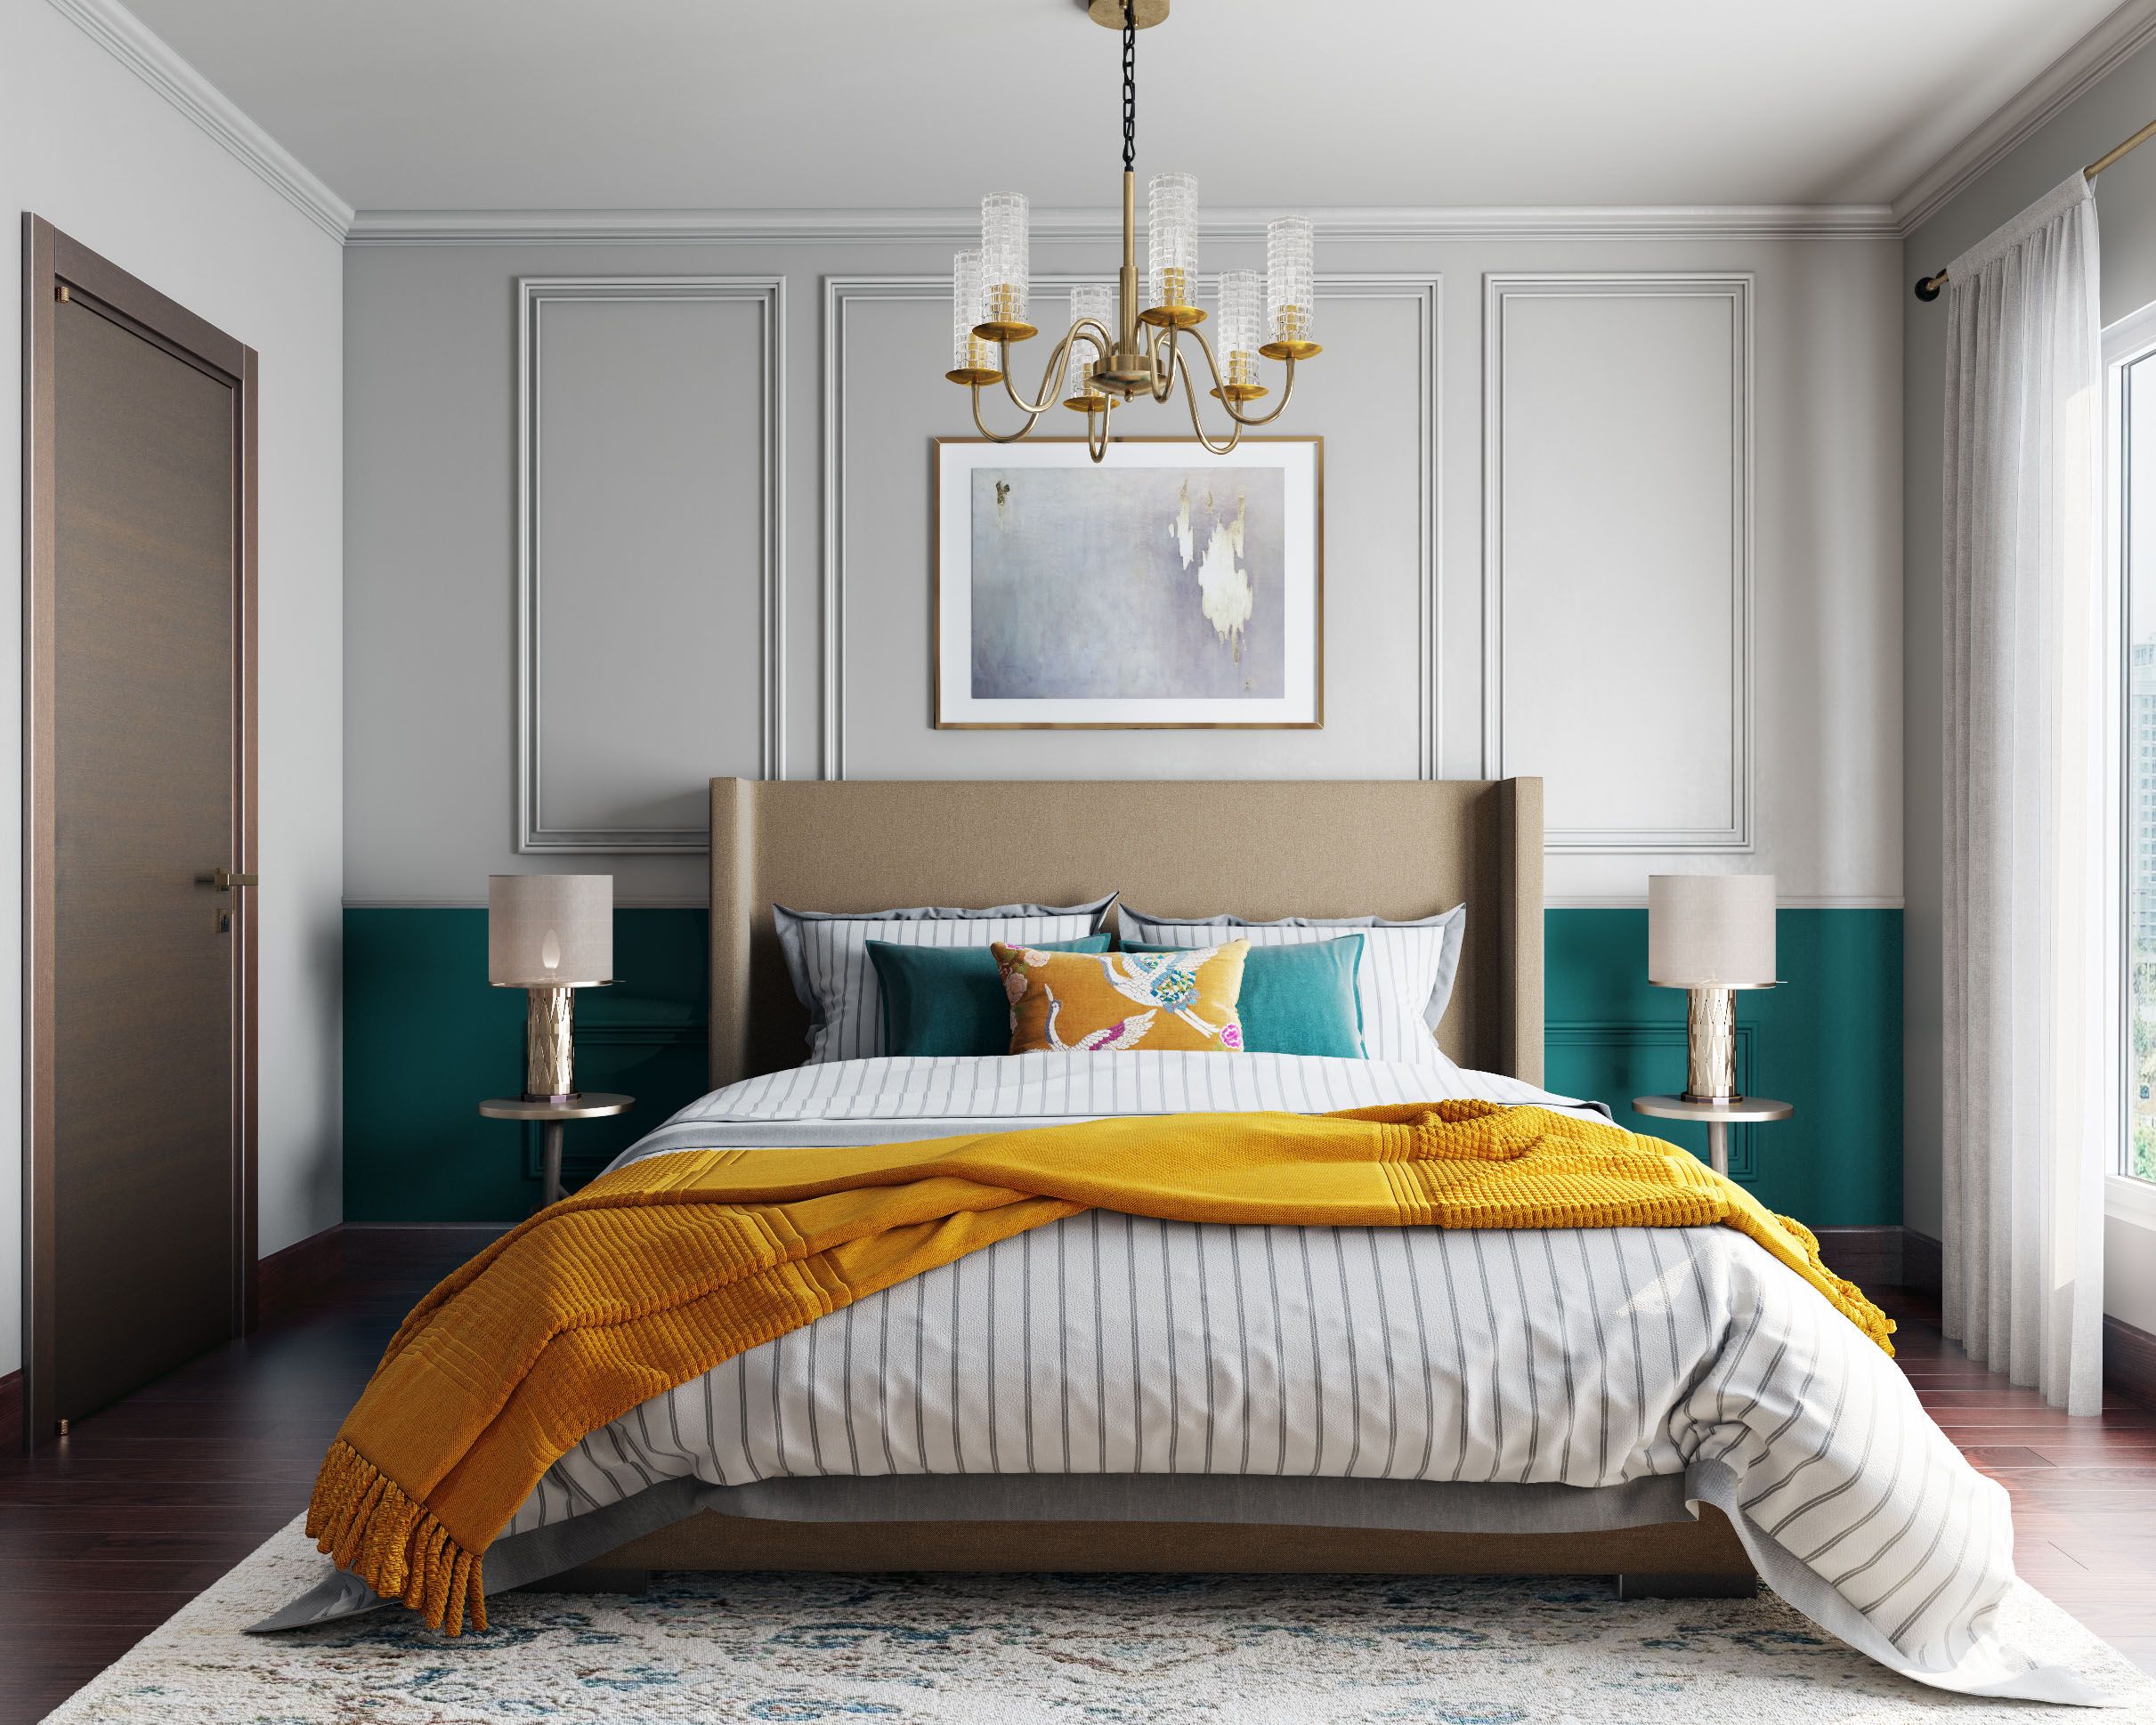 Modern Dual Tone Bedroom Wall Design With White And Teal Blue Paint And Trims